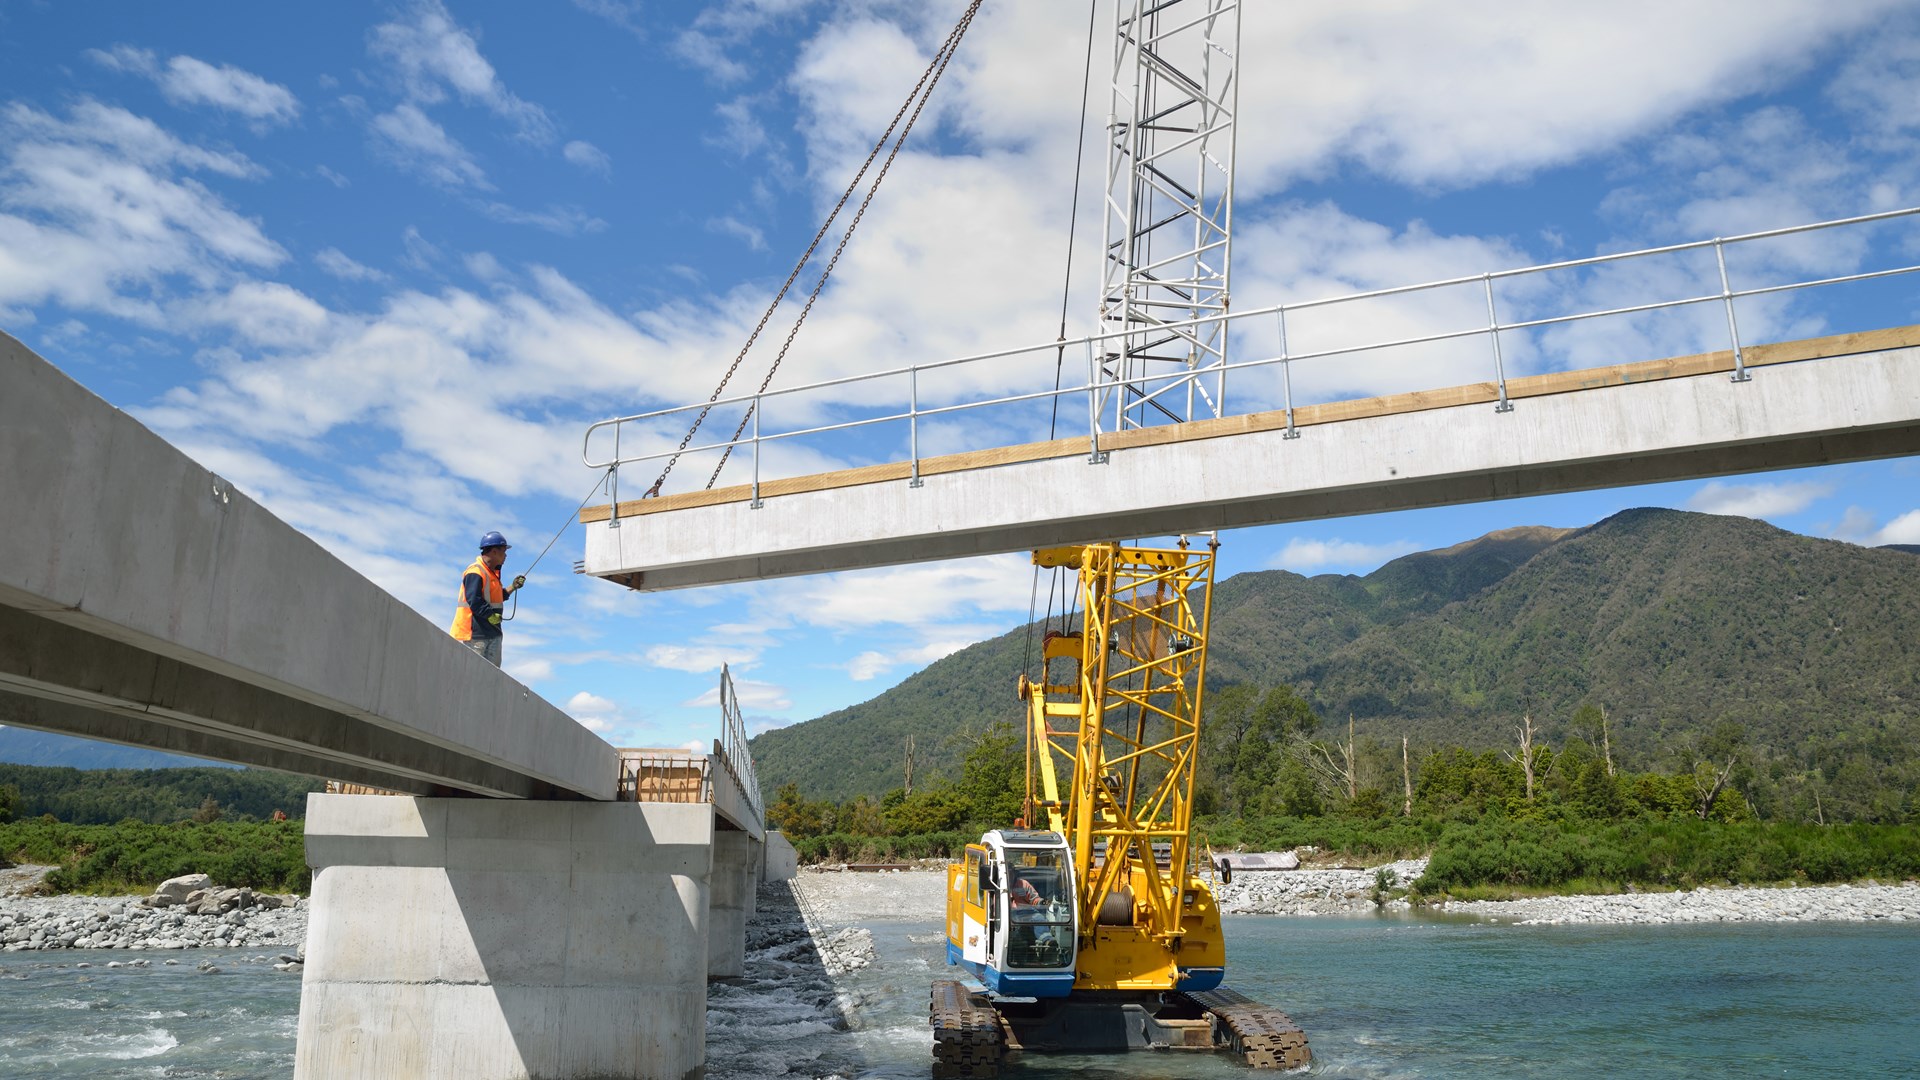 Construction of a concrete bridge, West Coast. Source: Lakeview_Images, iStock by Getty Images.